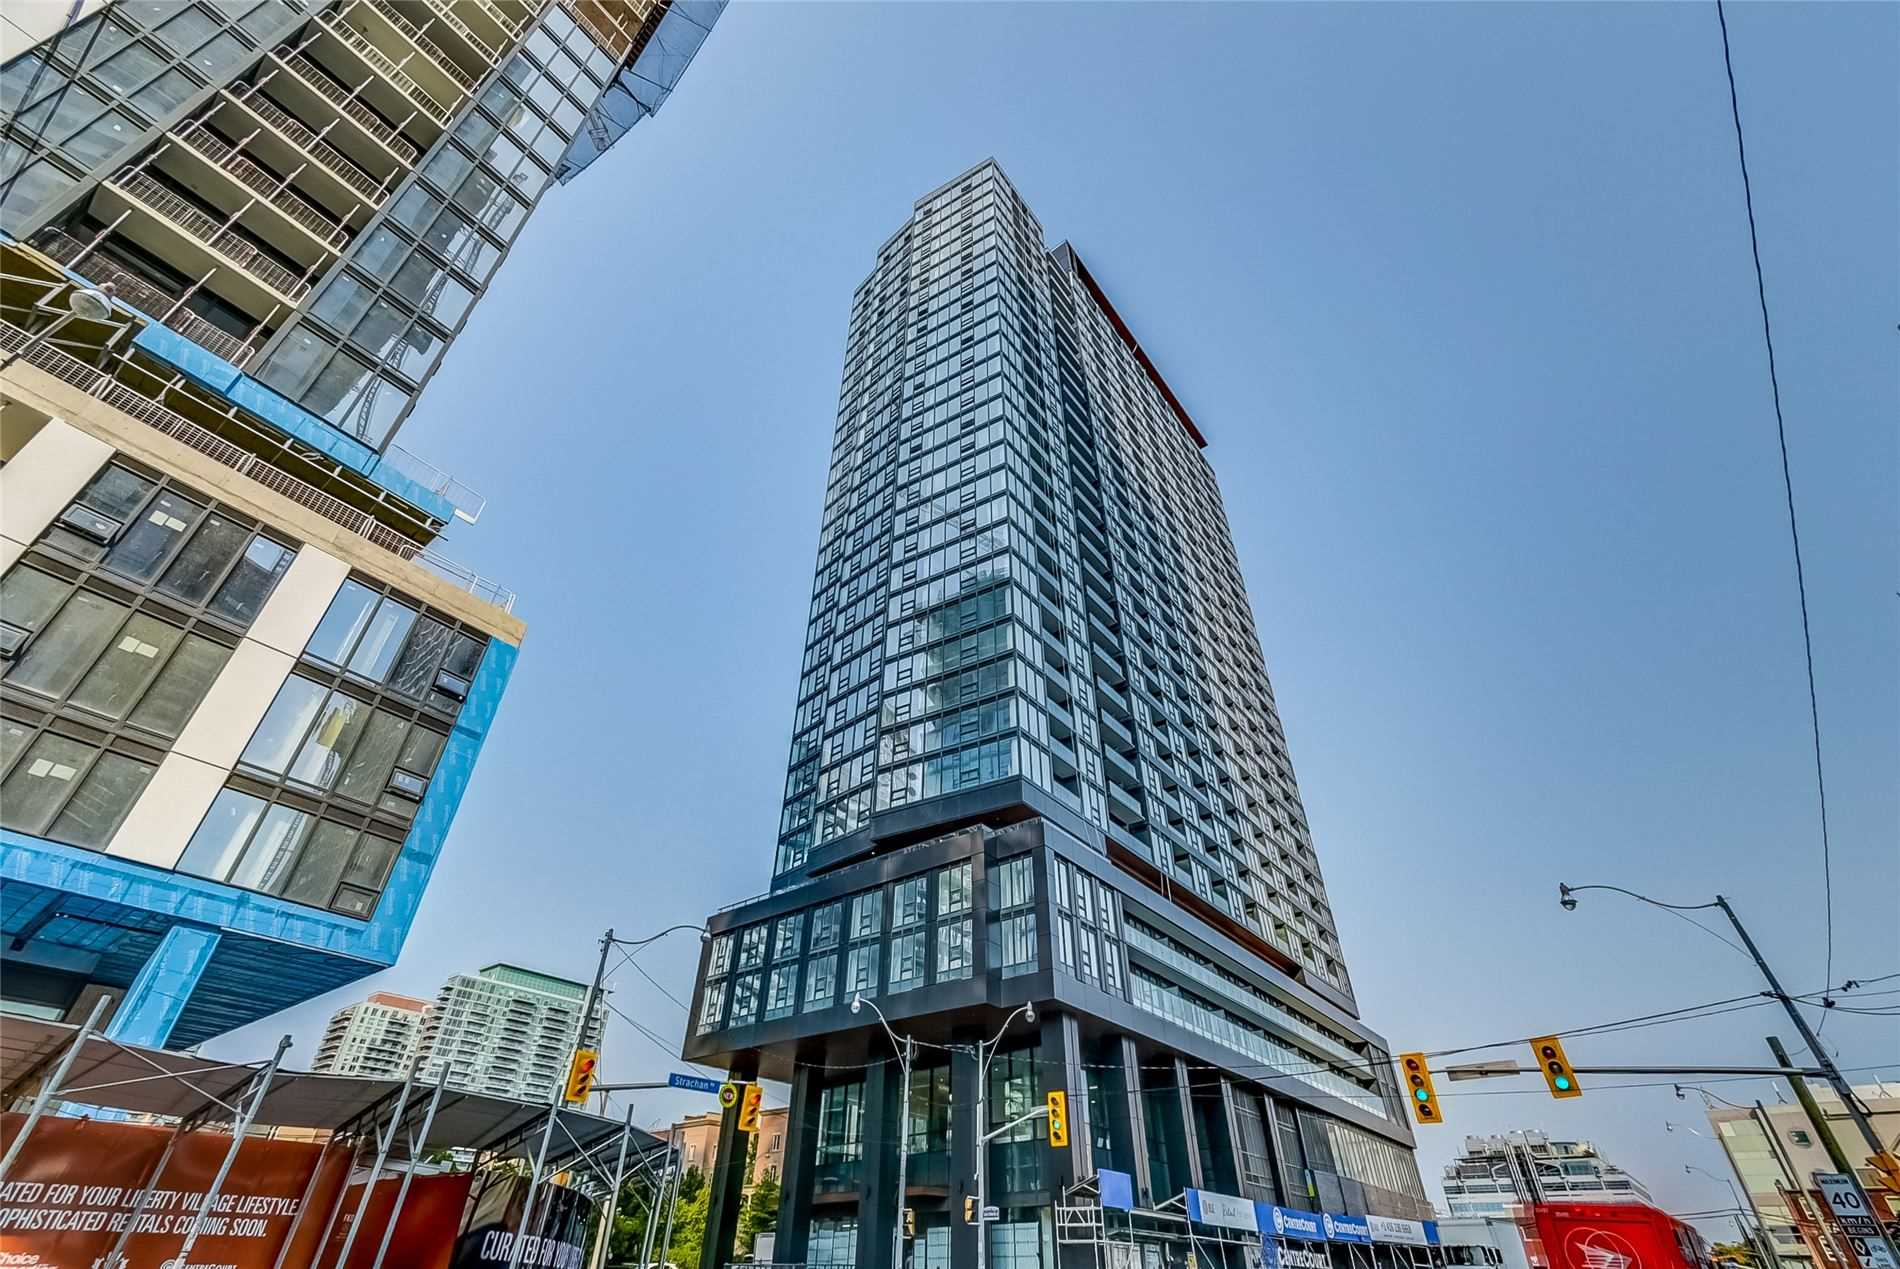 Street view of 19 Western Battery Rd, a bluish condo with a glass facade.